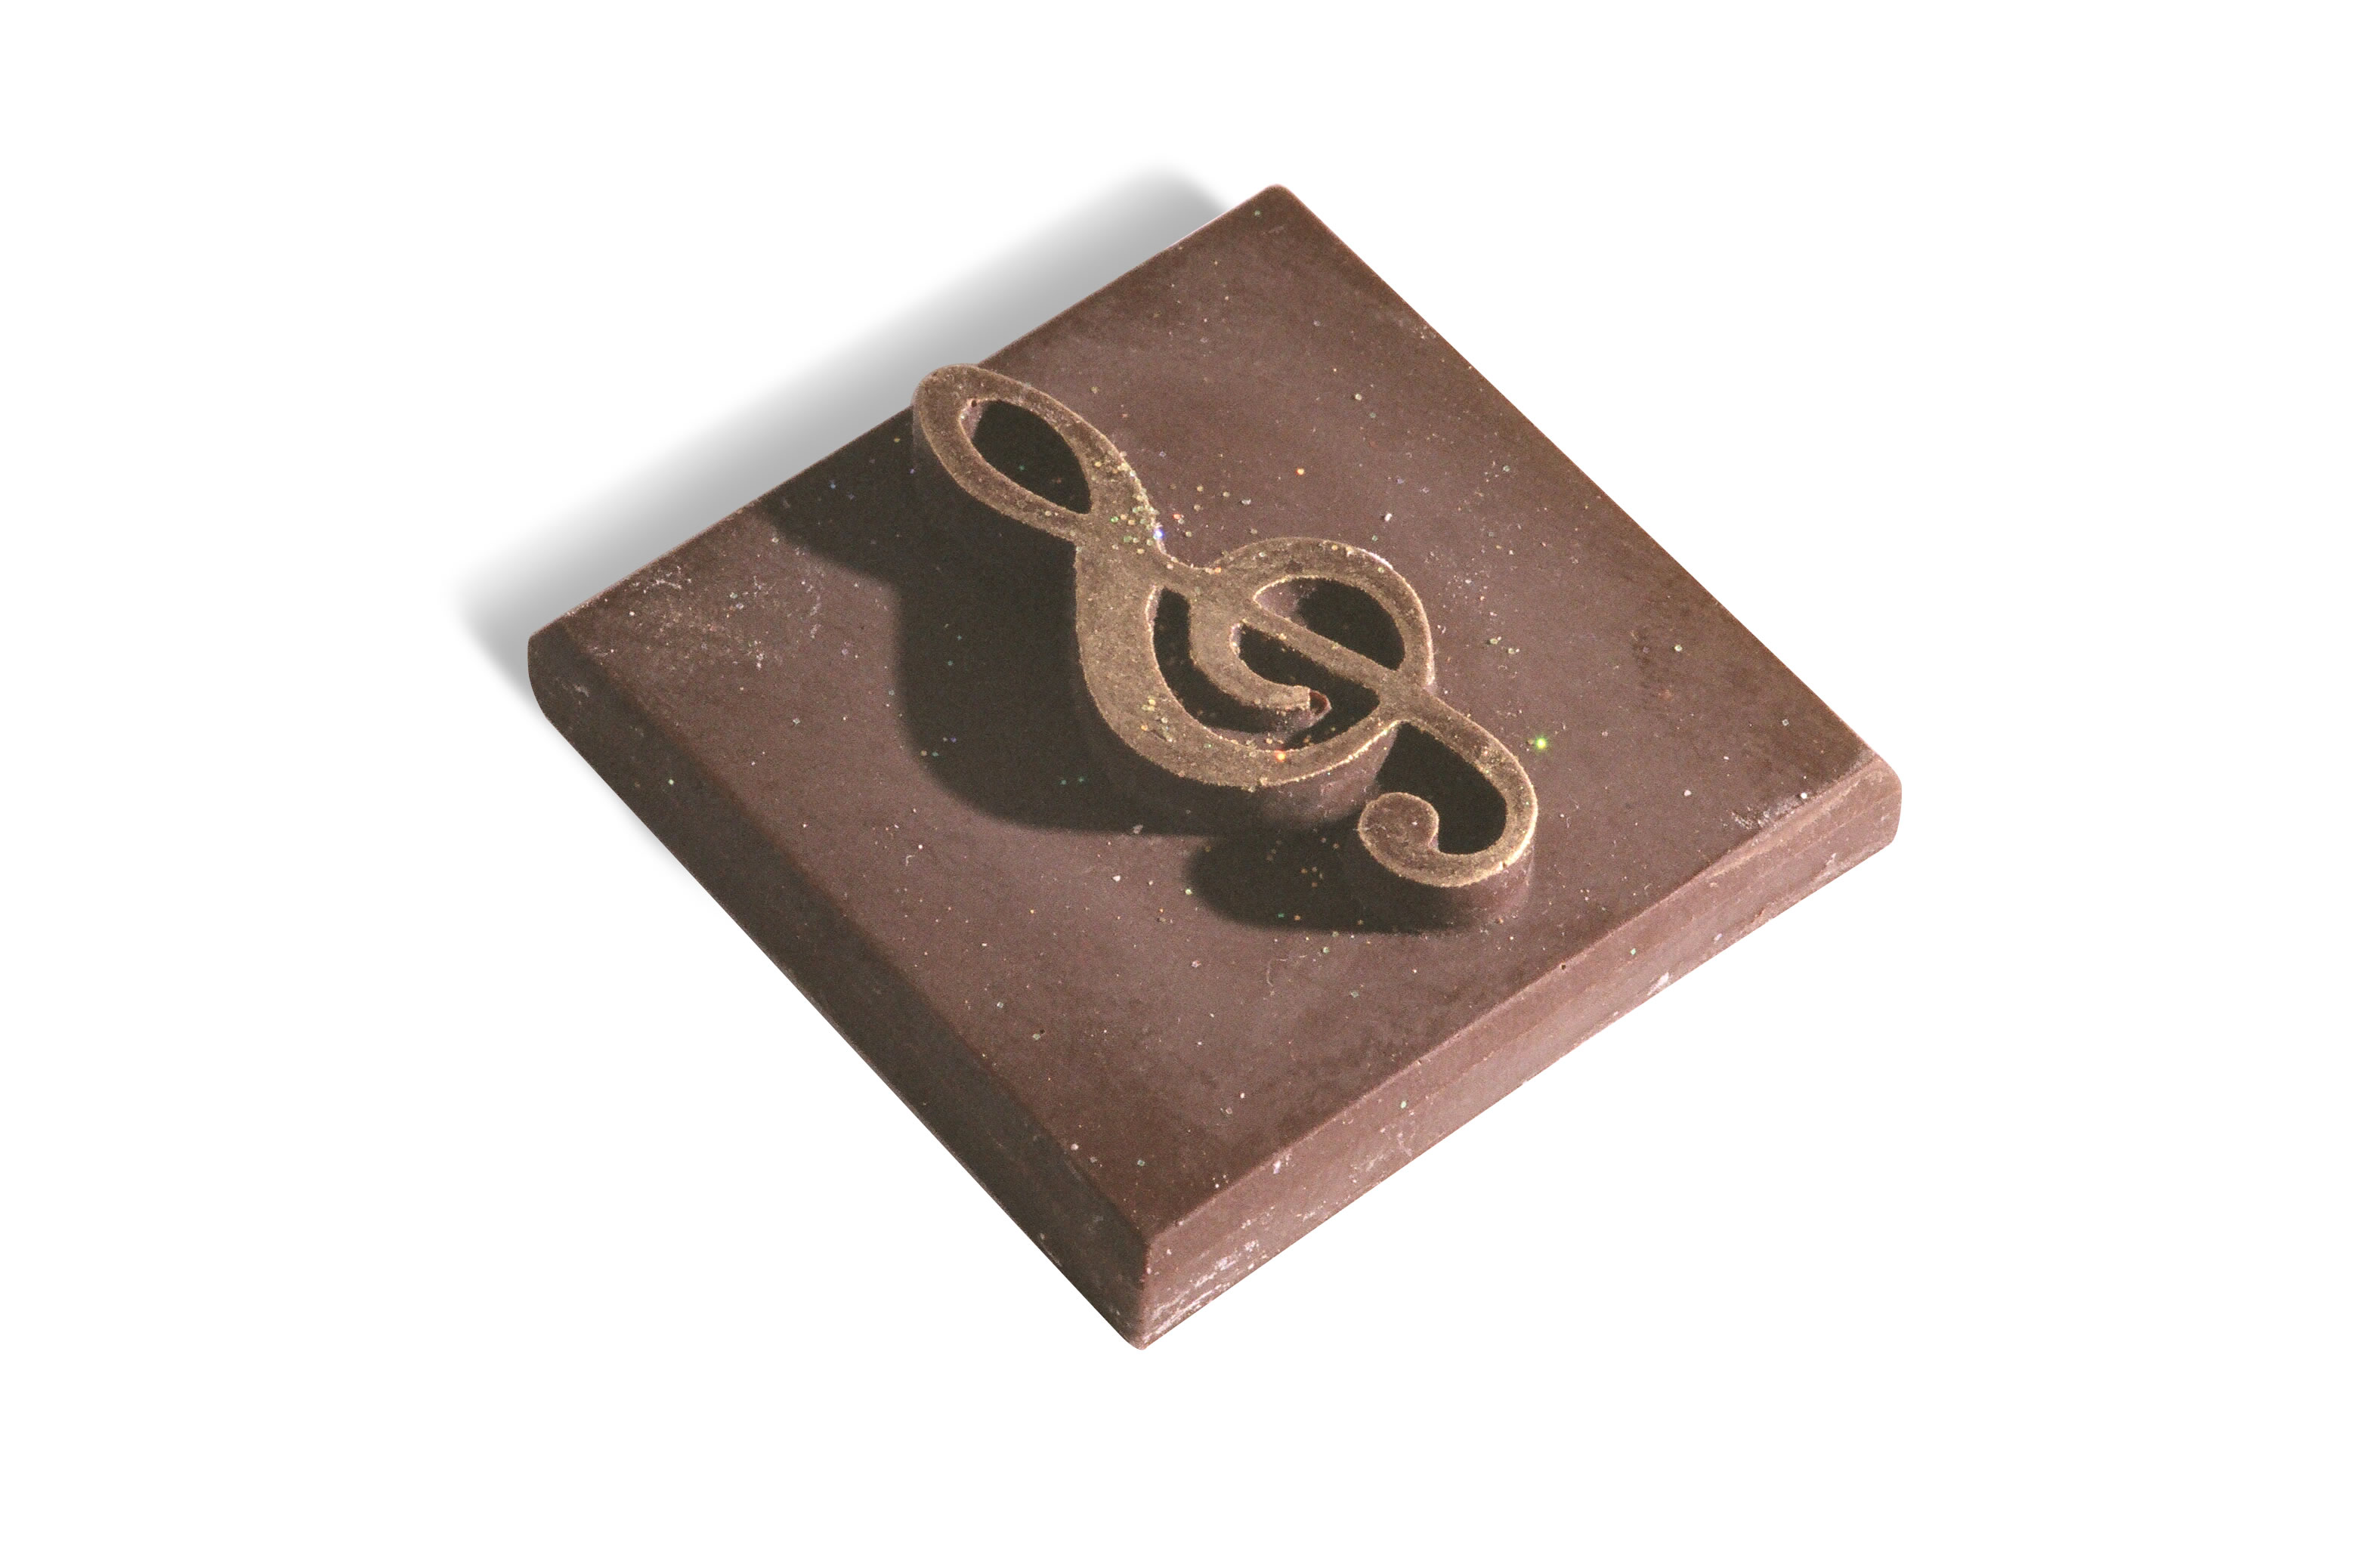 Indulge with rich belgian chocolate beautifully designed as a treble clef.